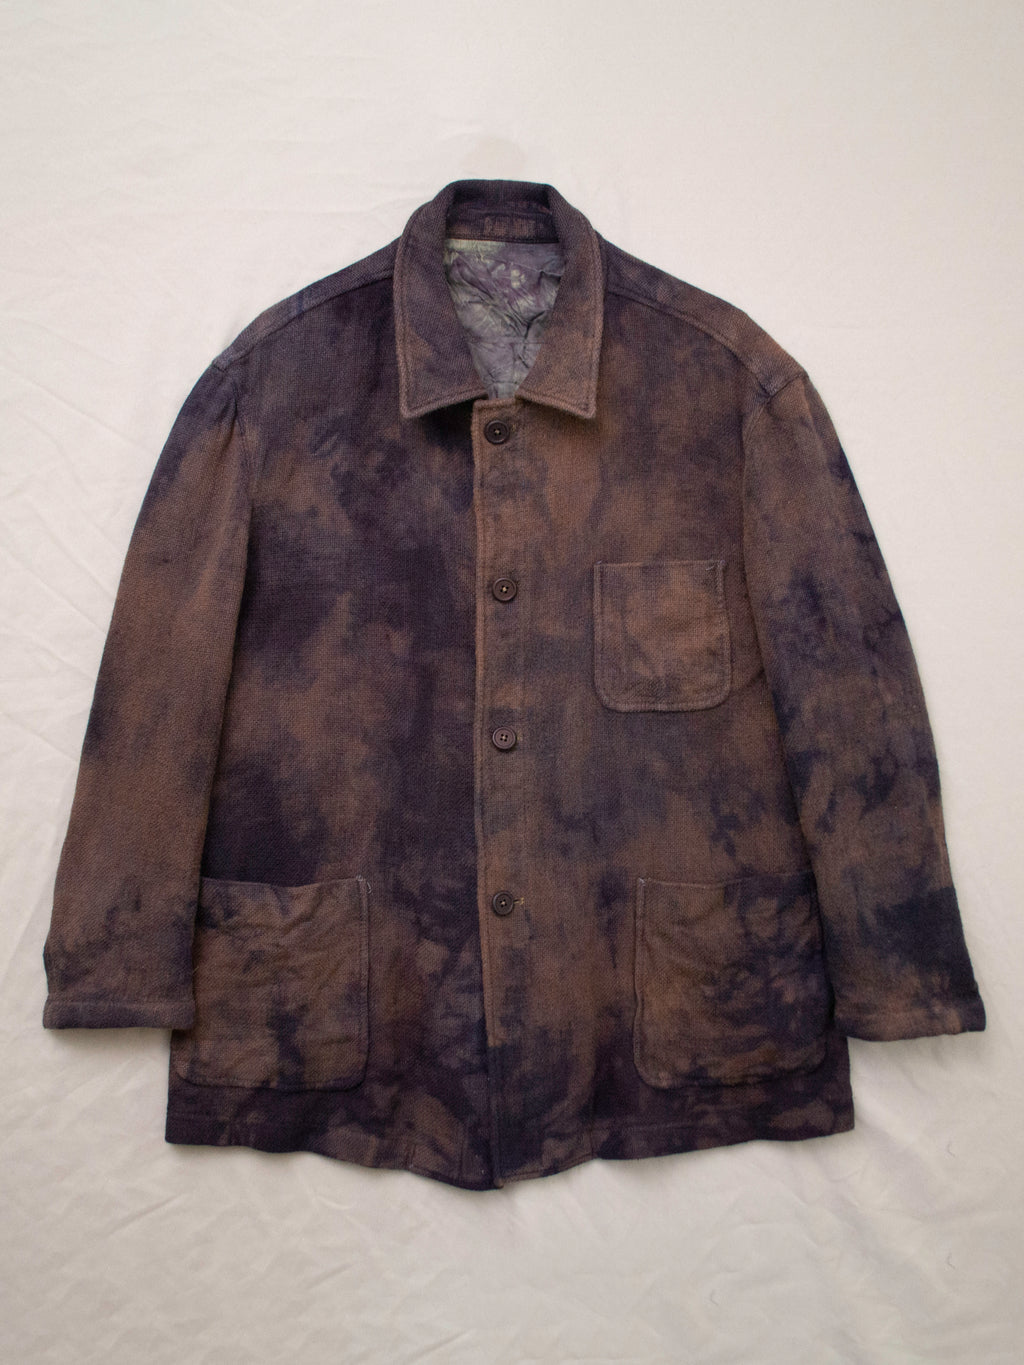 Over-Dyed 1970s Oversized Linen Field Jacket (Unisex US M/L)